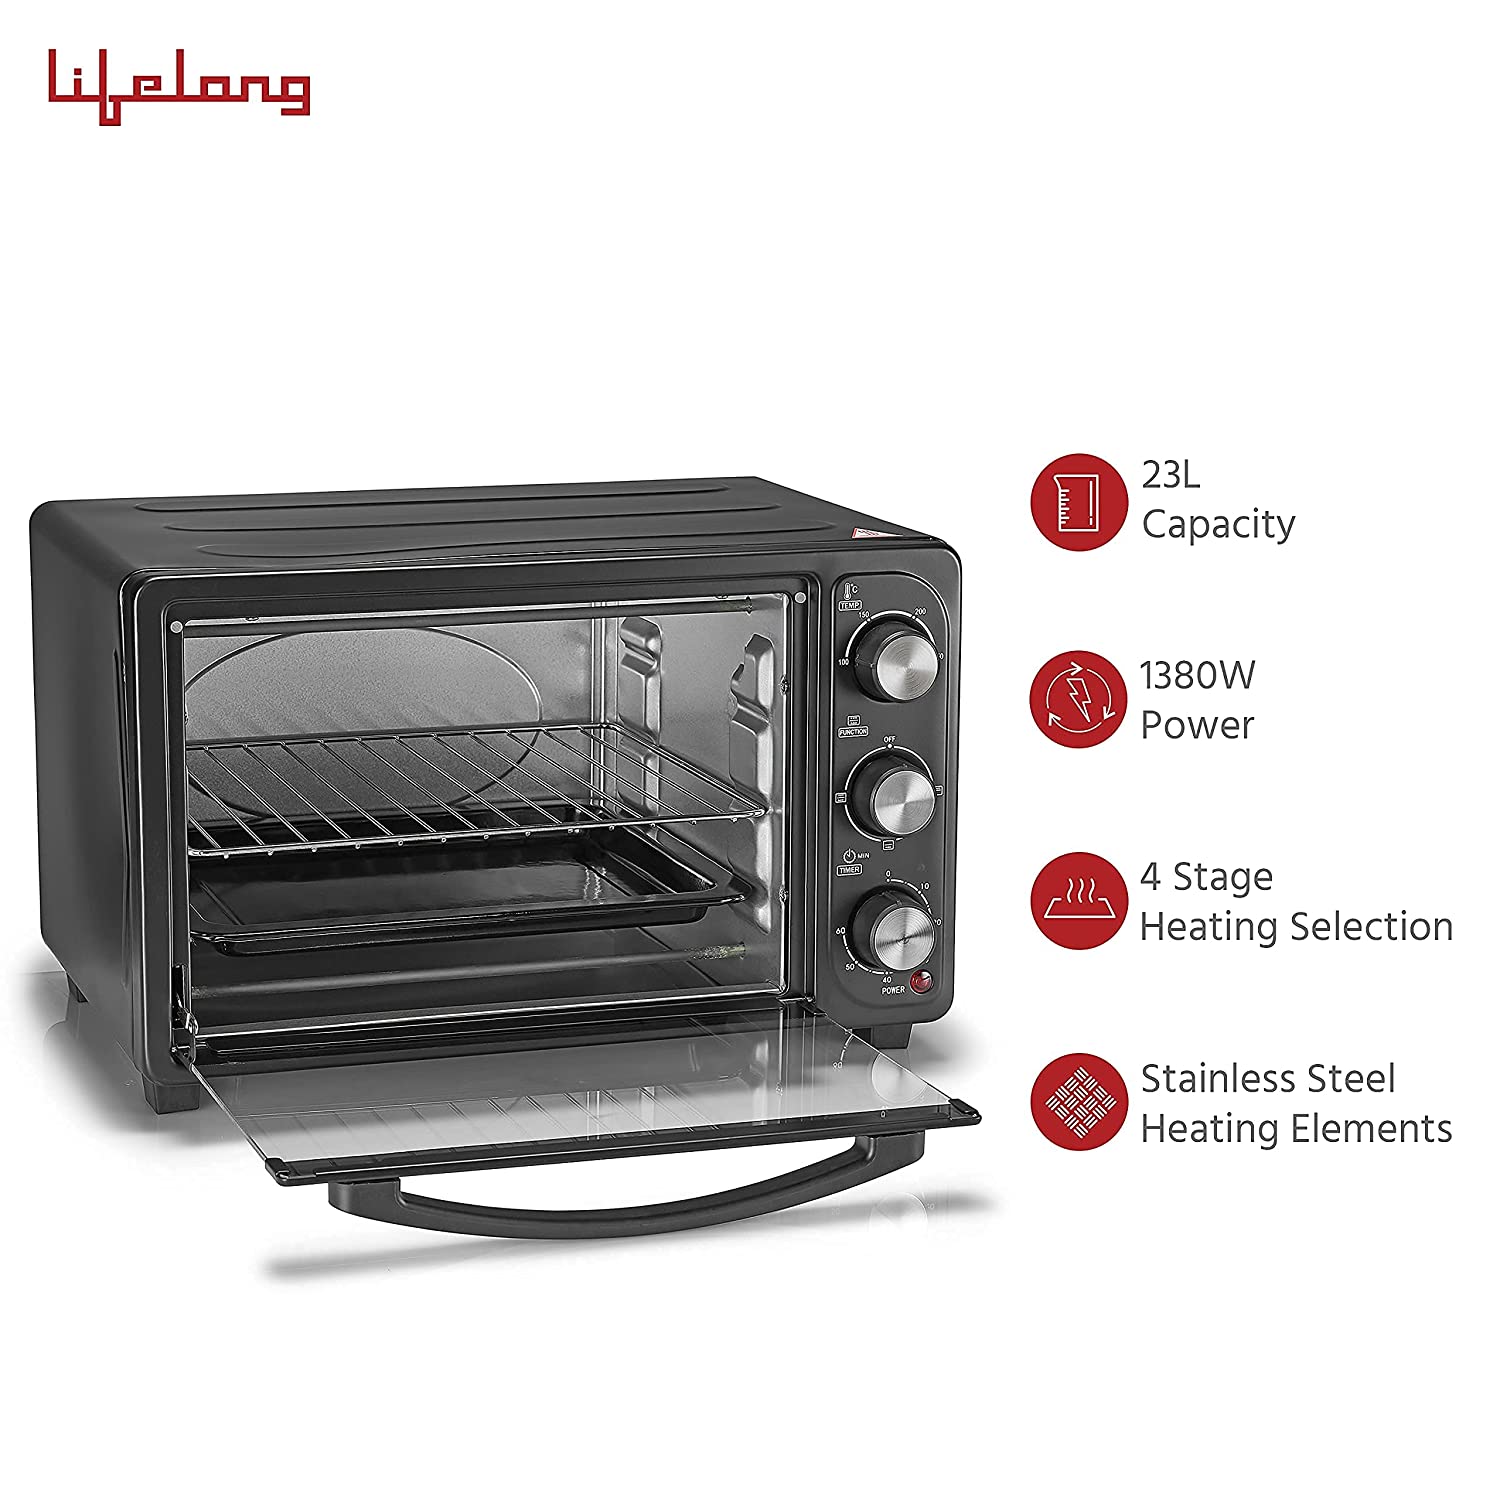 How to Use an OTG Oven Effectively? Step-by-Step Guide